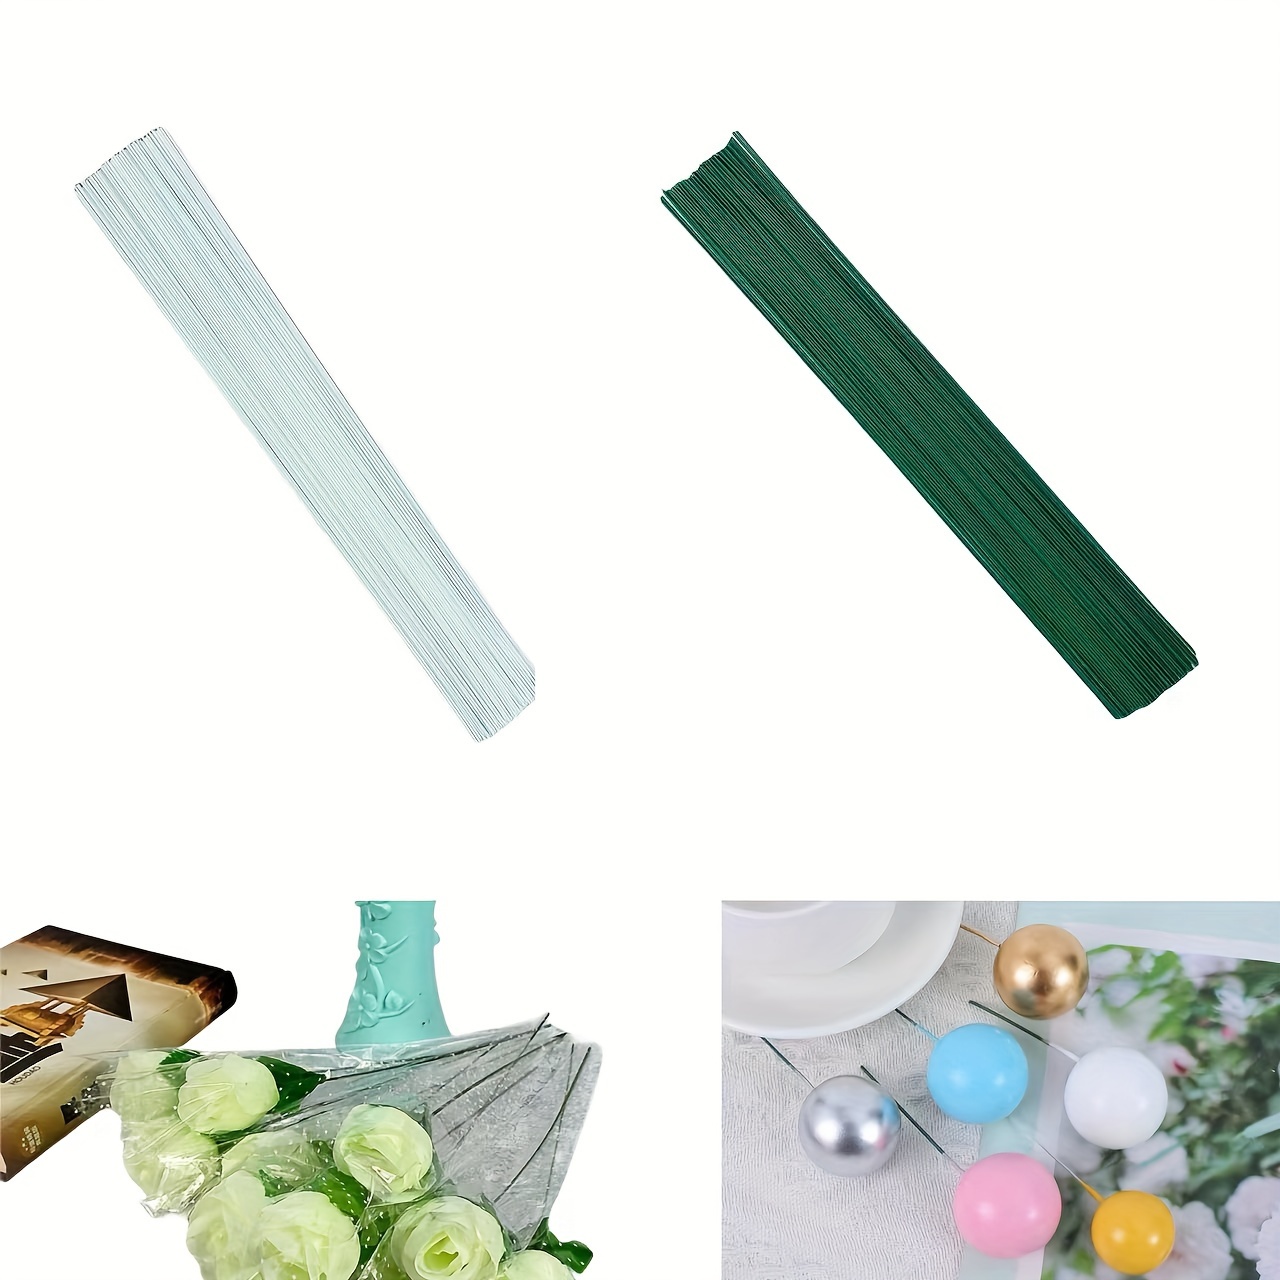 Florist's Green Cloth Stem Wire, Low Cost on Florist Supplies - Wholesale  Flowers and Supplies